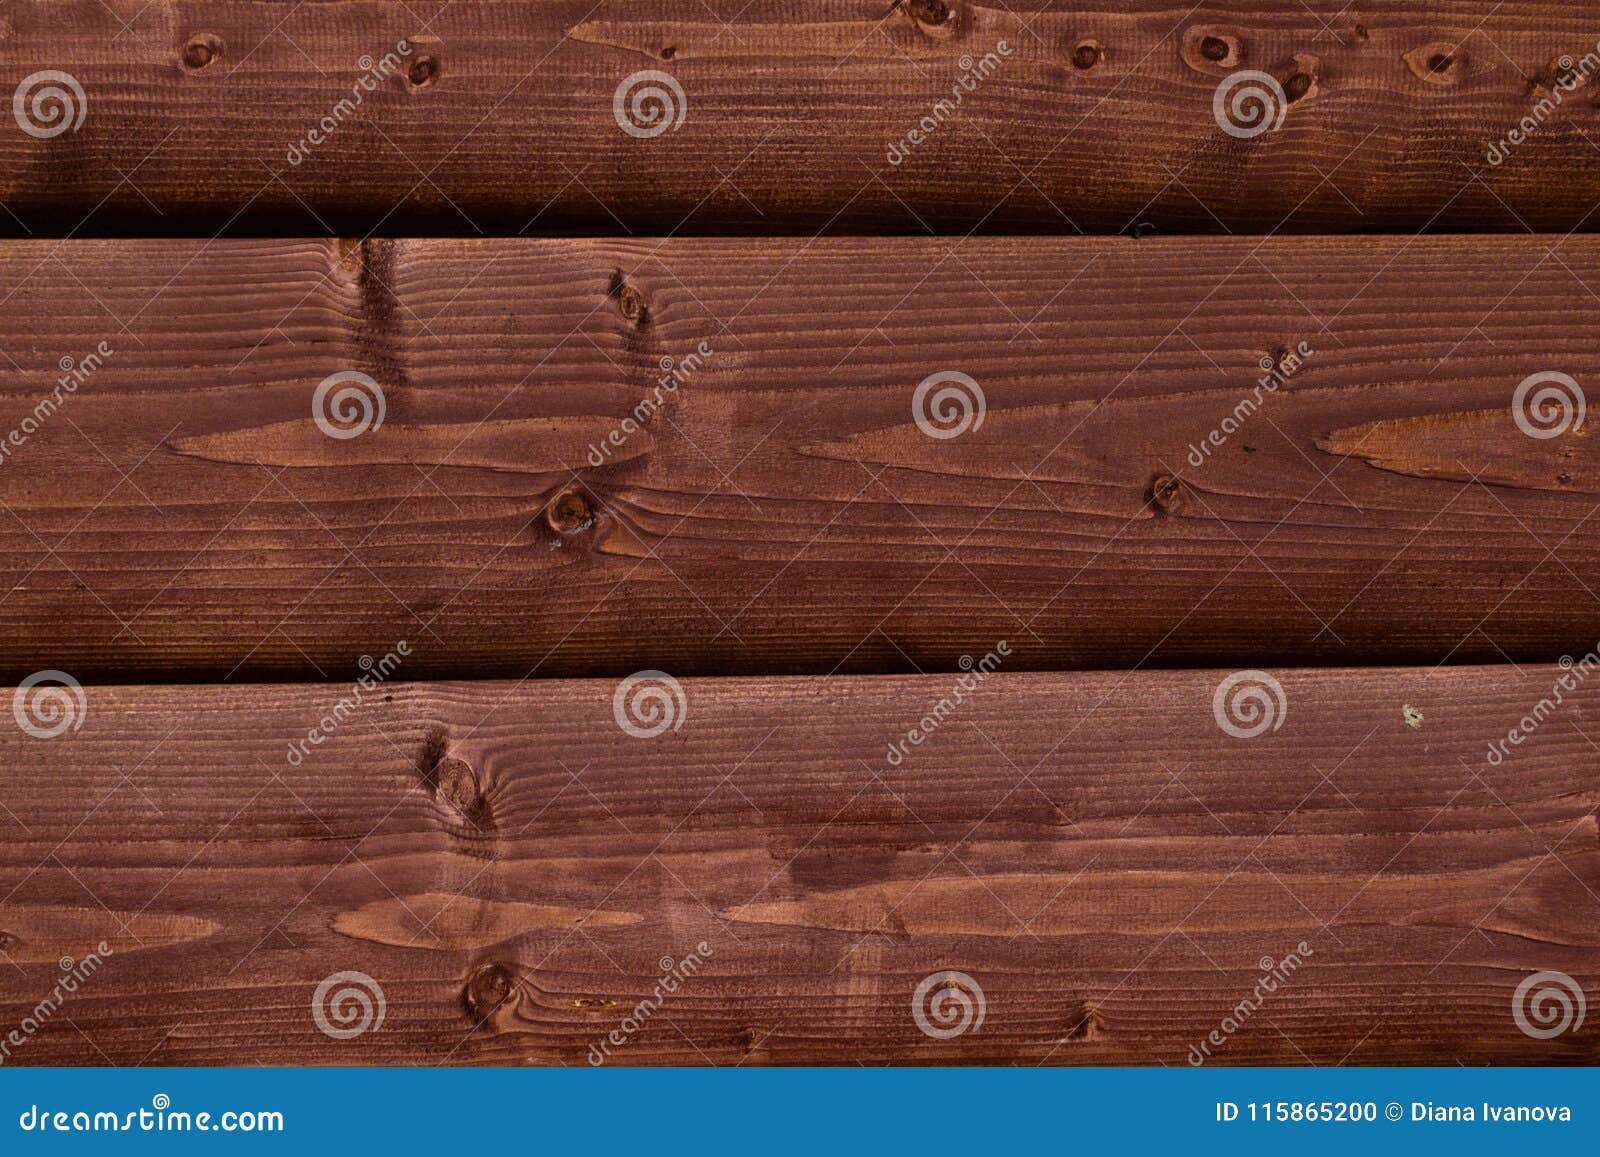 Natural Interior With Wood Wall Panels Texture Of Wood Use